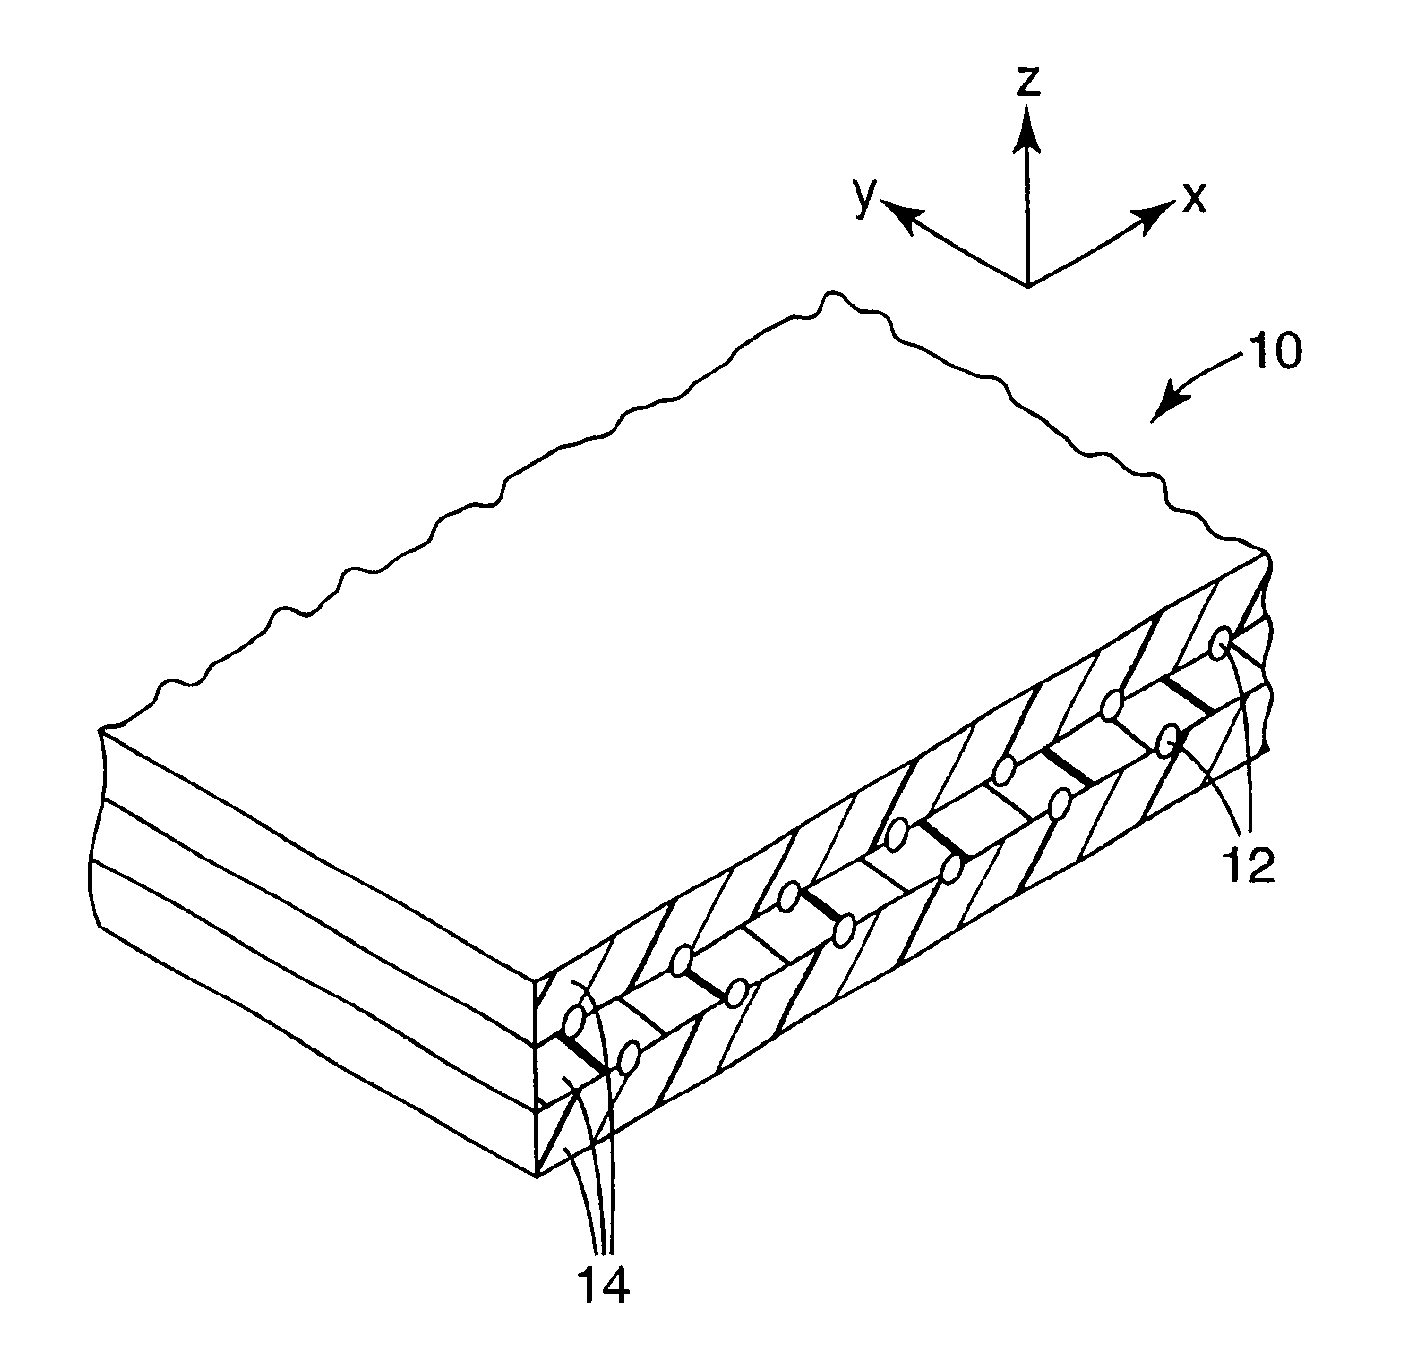 Polymeric coextruded multilayer articles